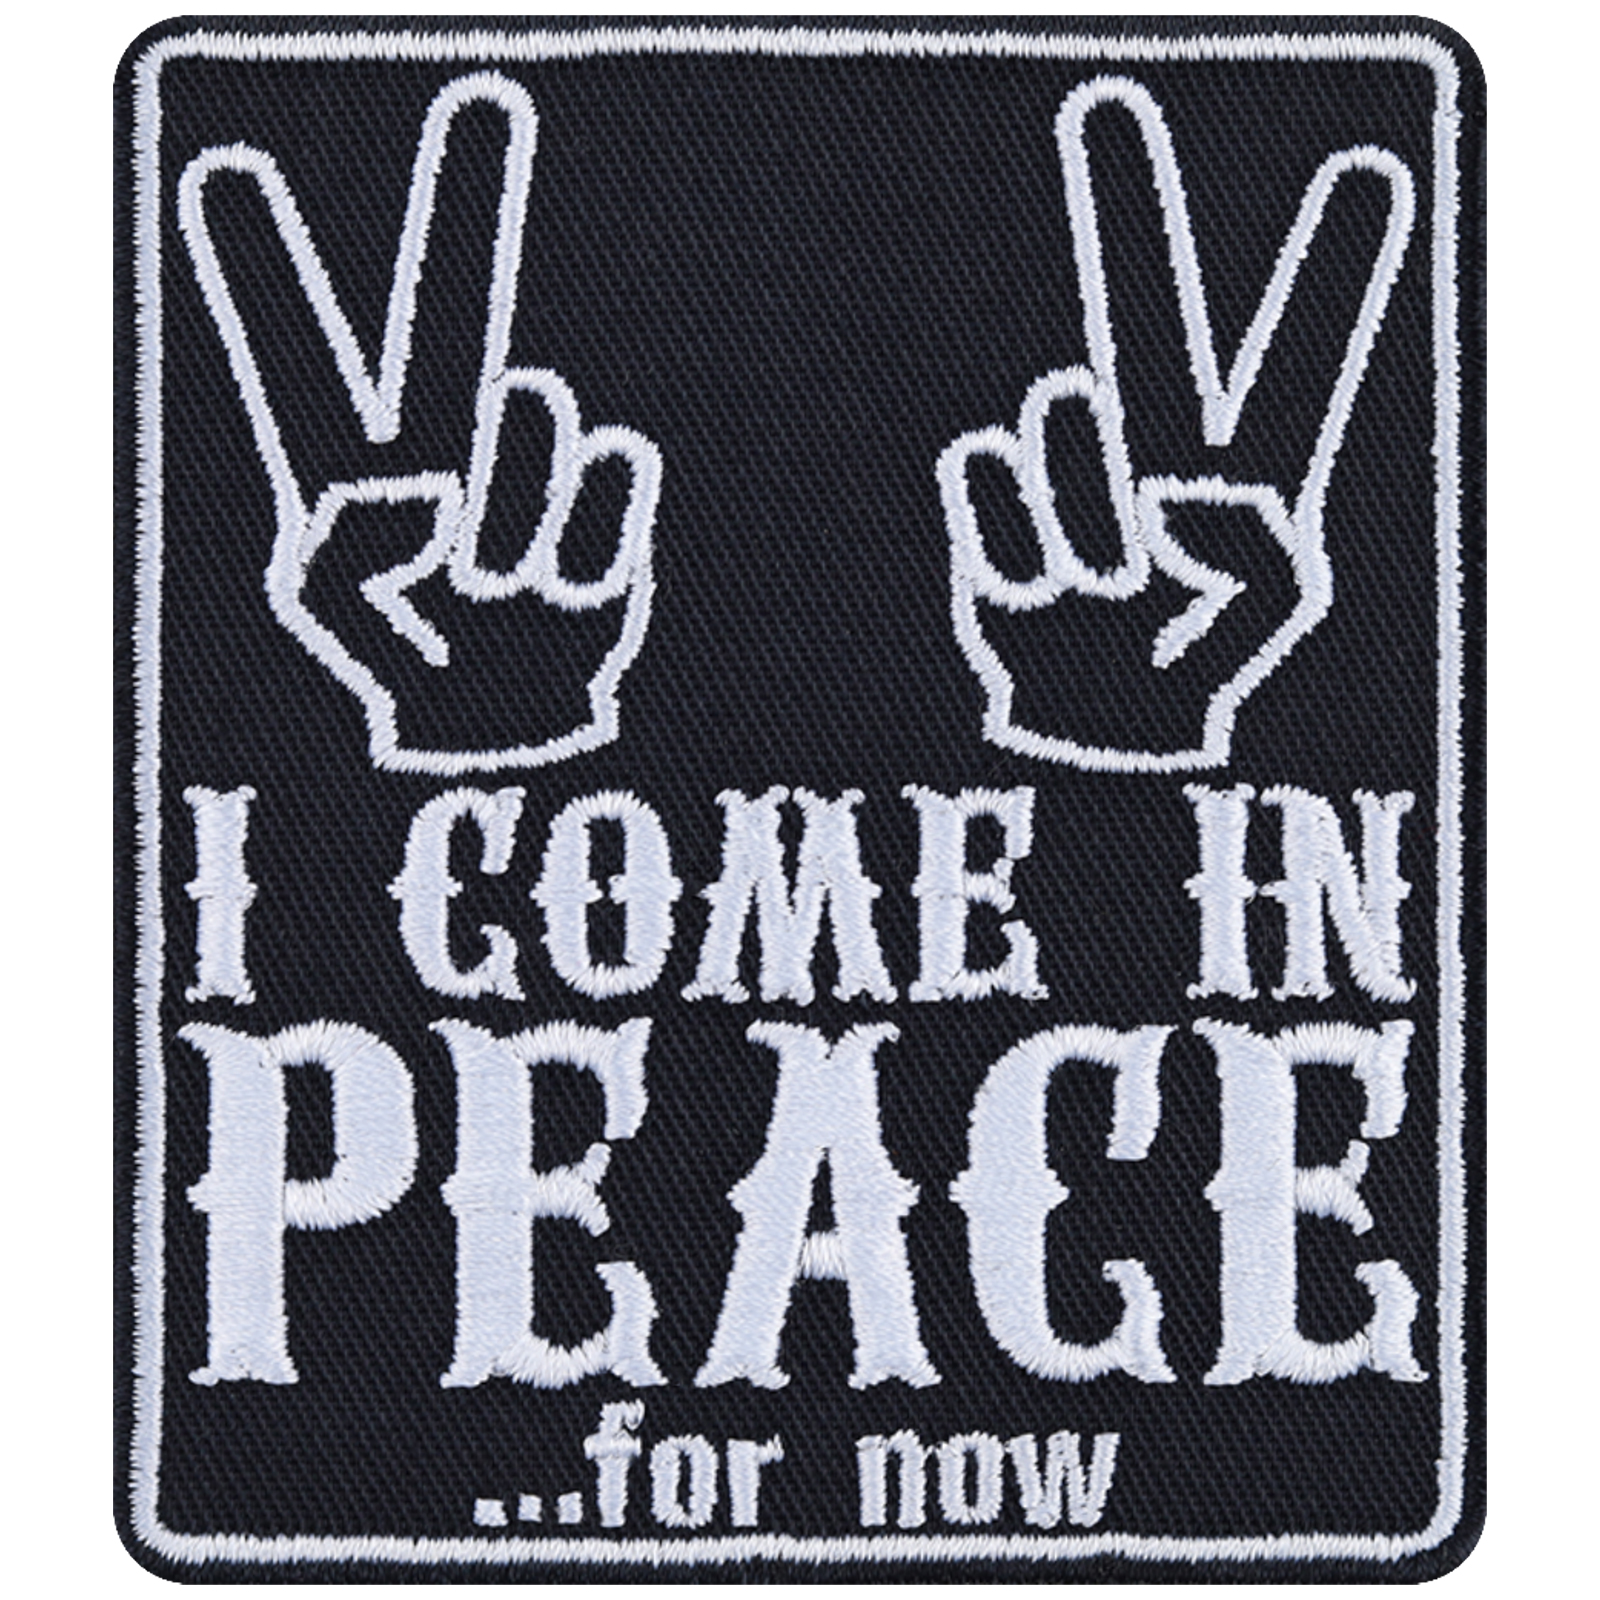 Come in peace for now - Patch